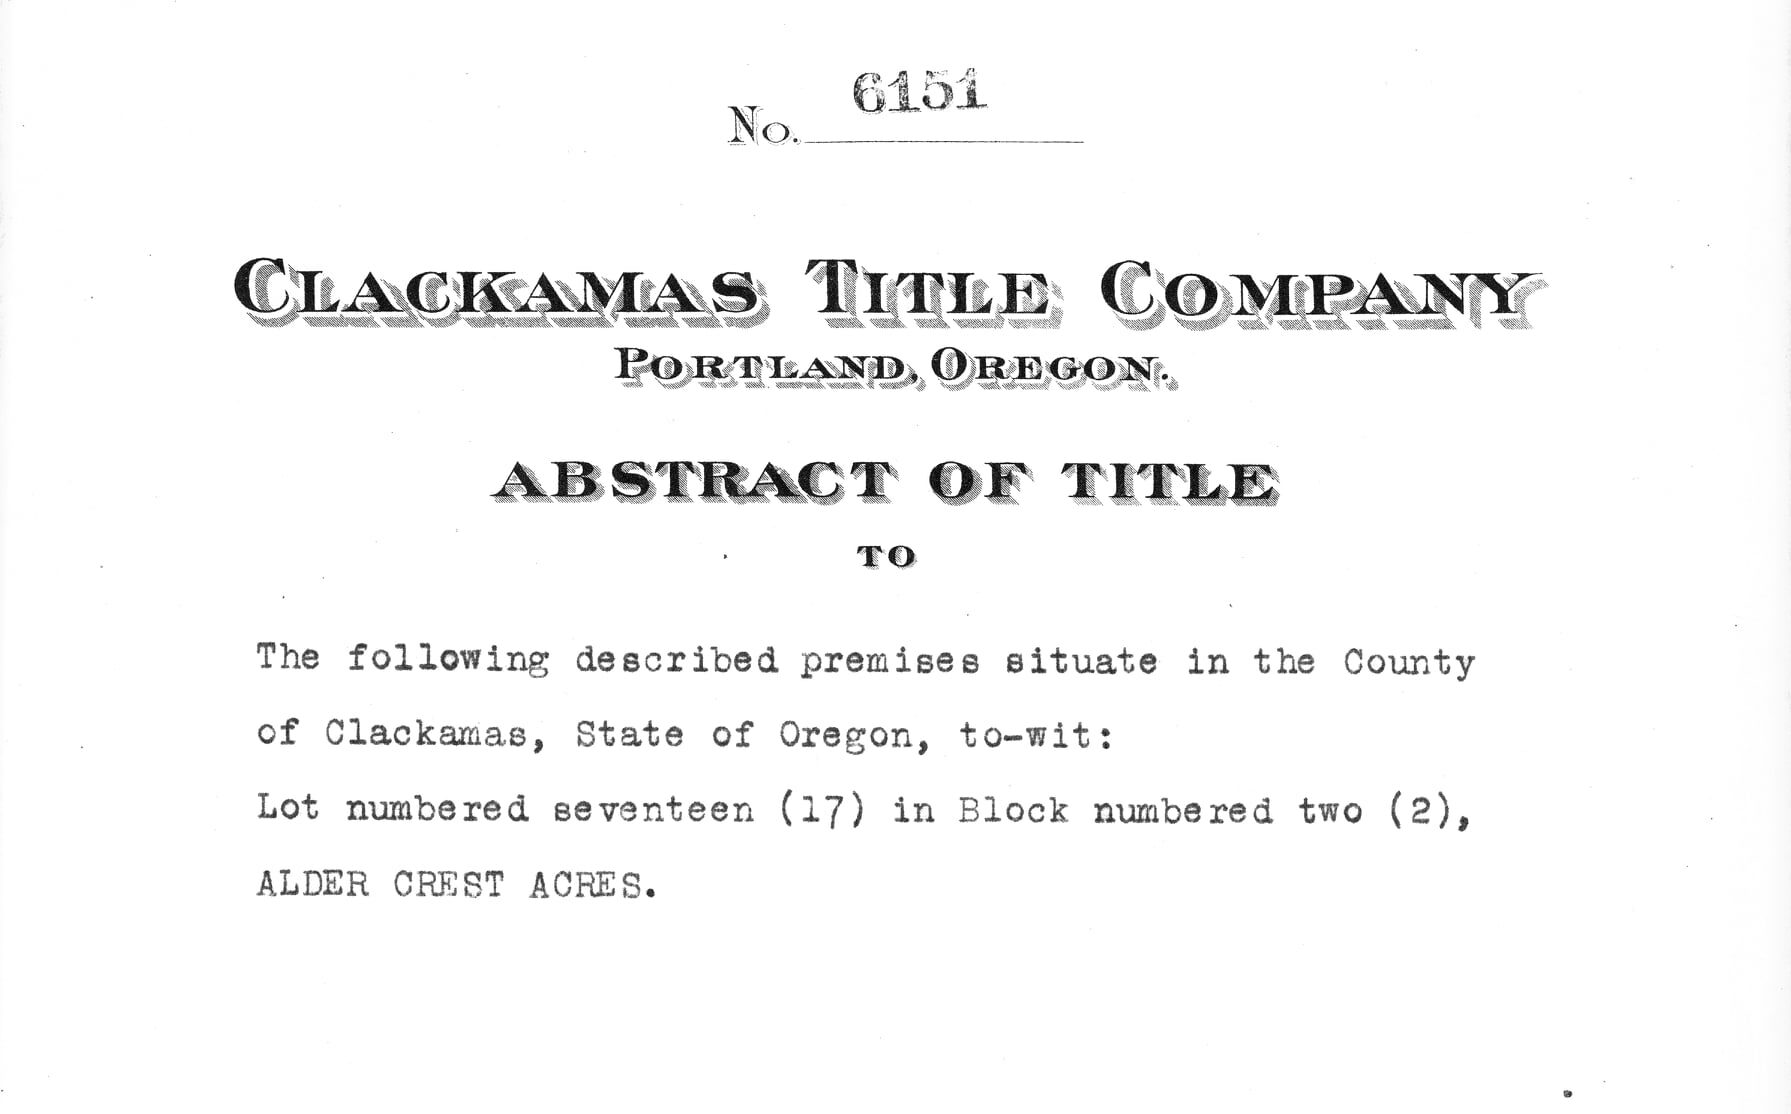 Image of opening page of an Abstract of Title